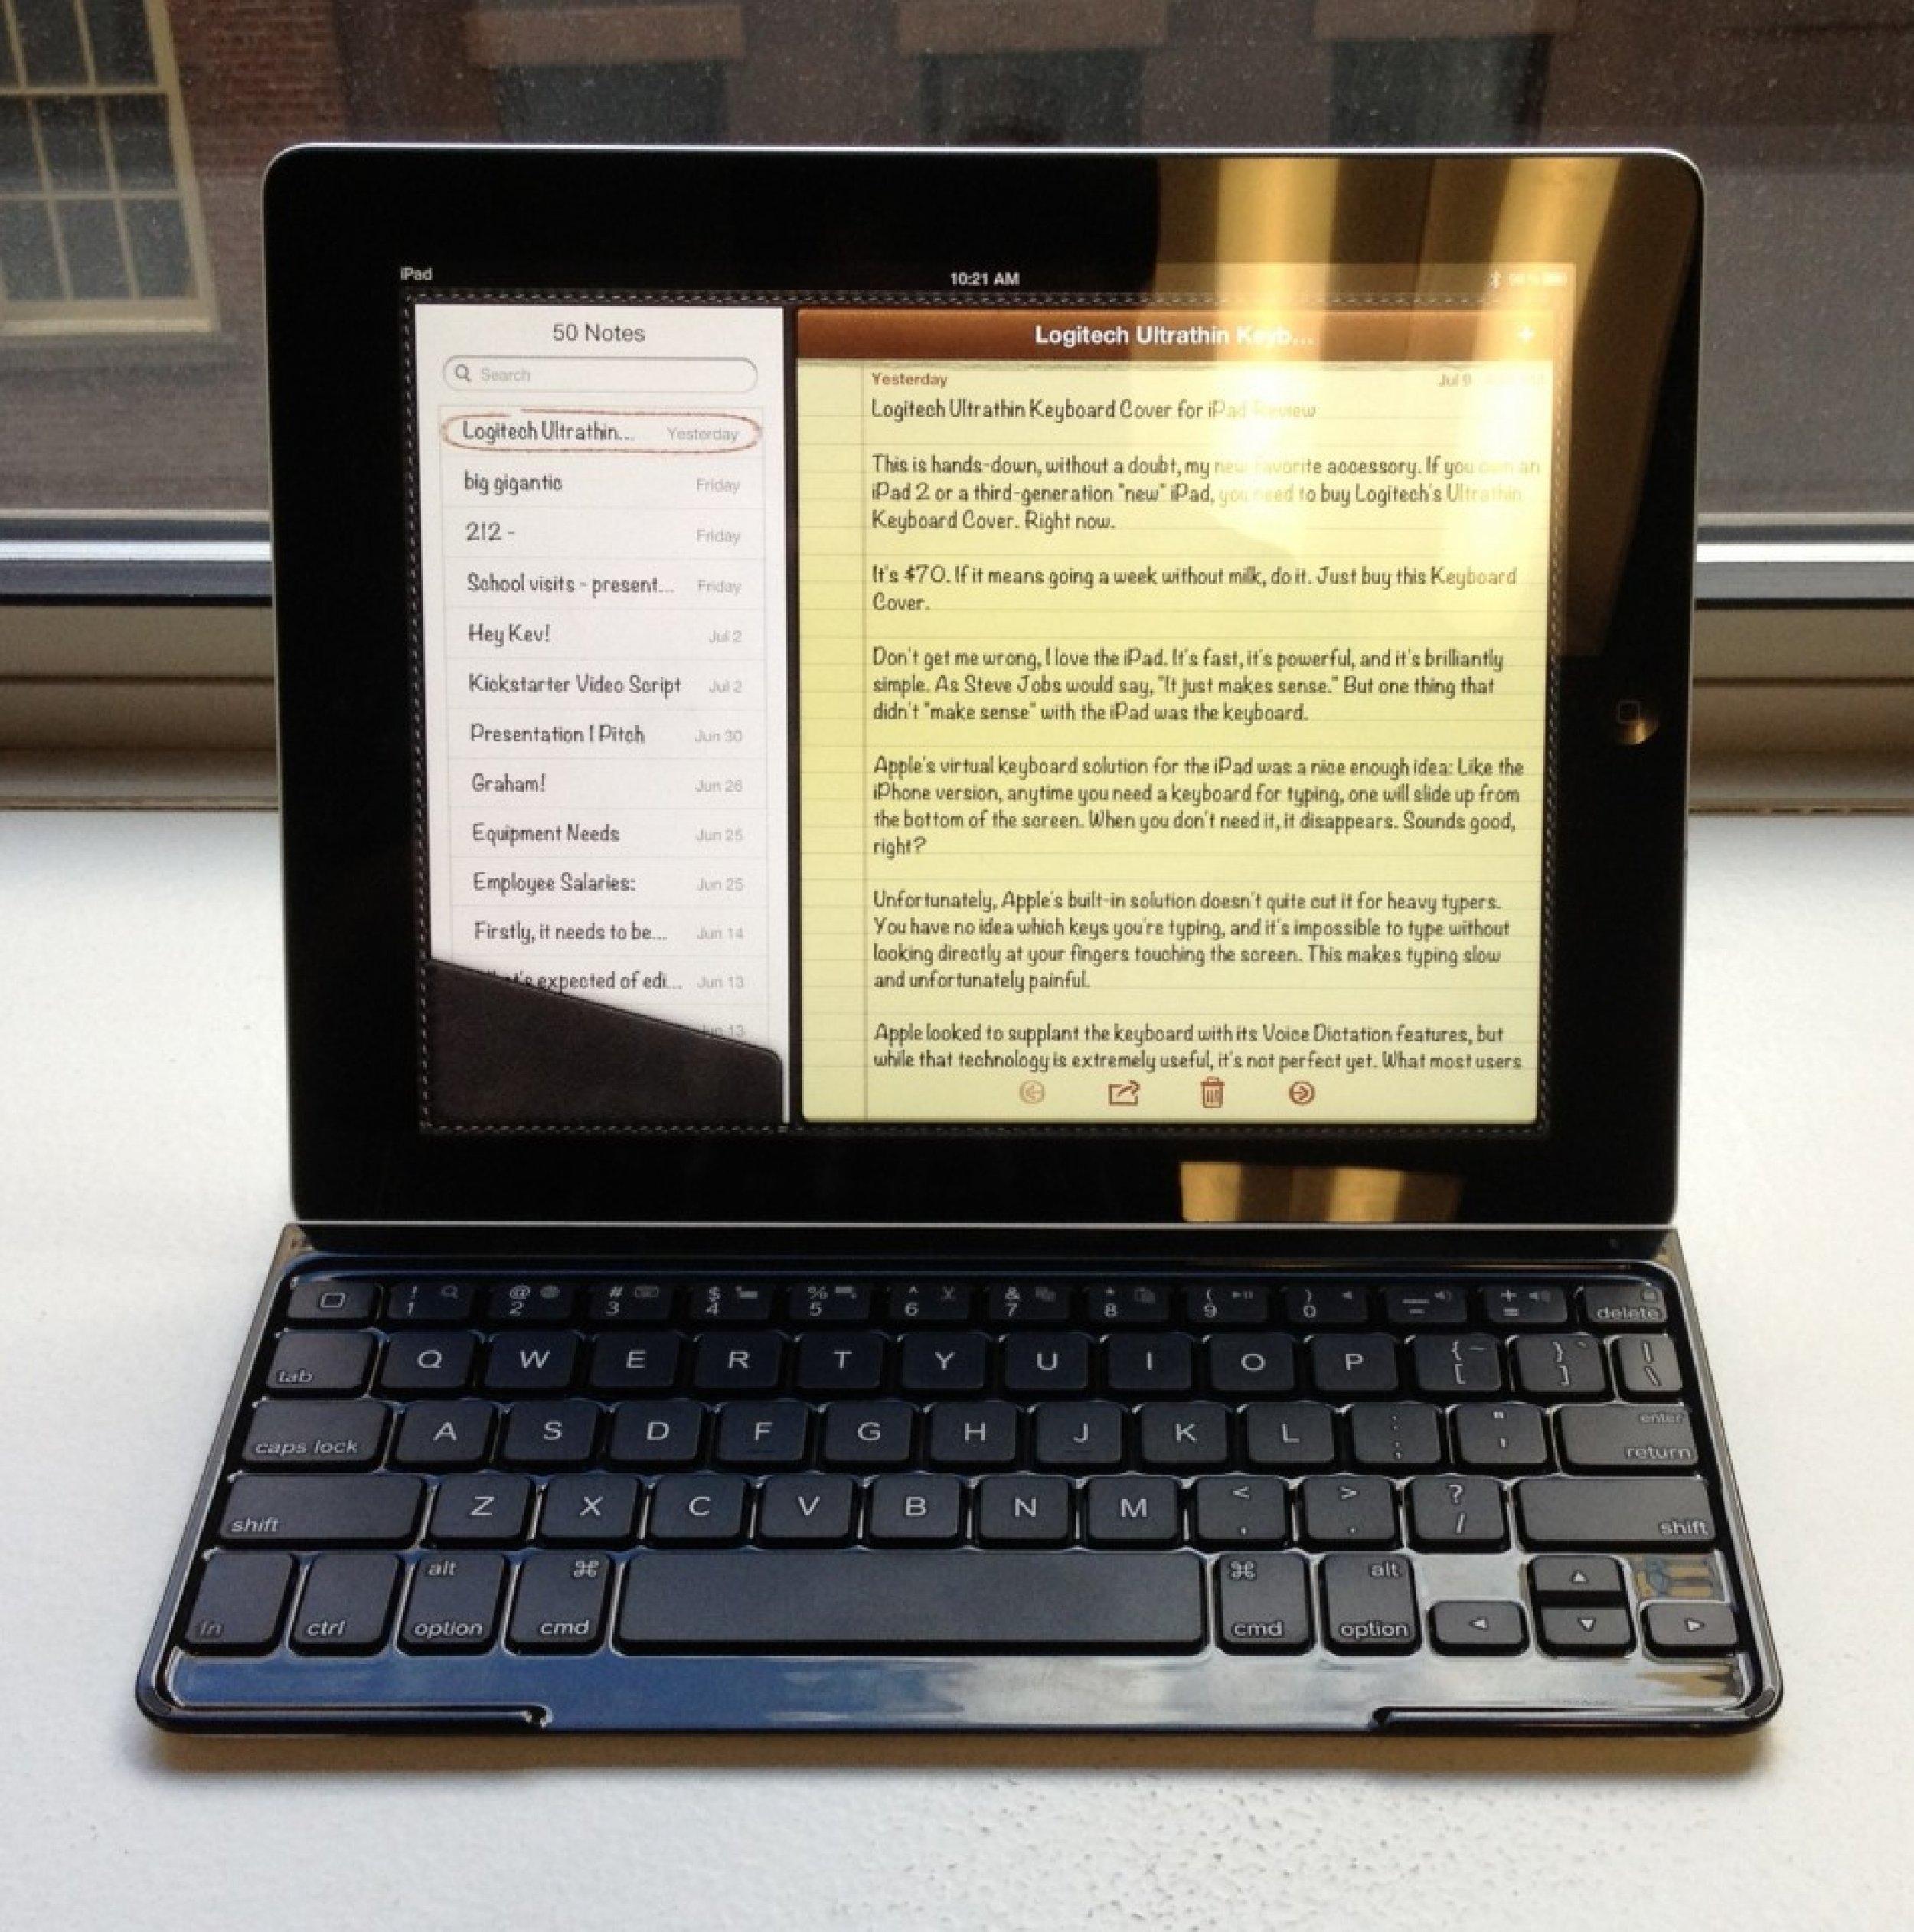 The Best Apple iPad Accessory Ever Meet The Ultrathin Keyboard Cover From Logitech